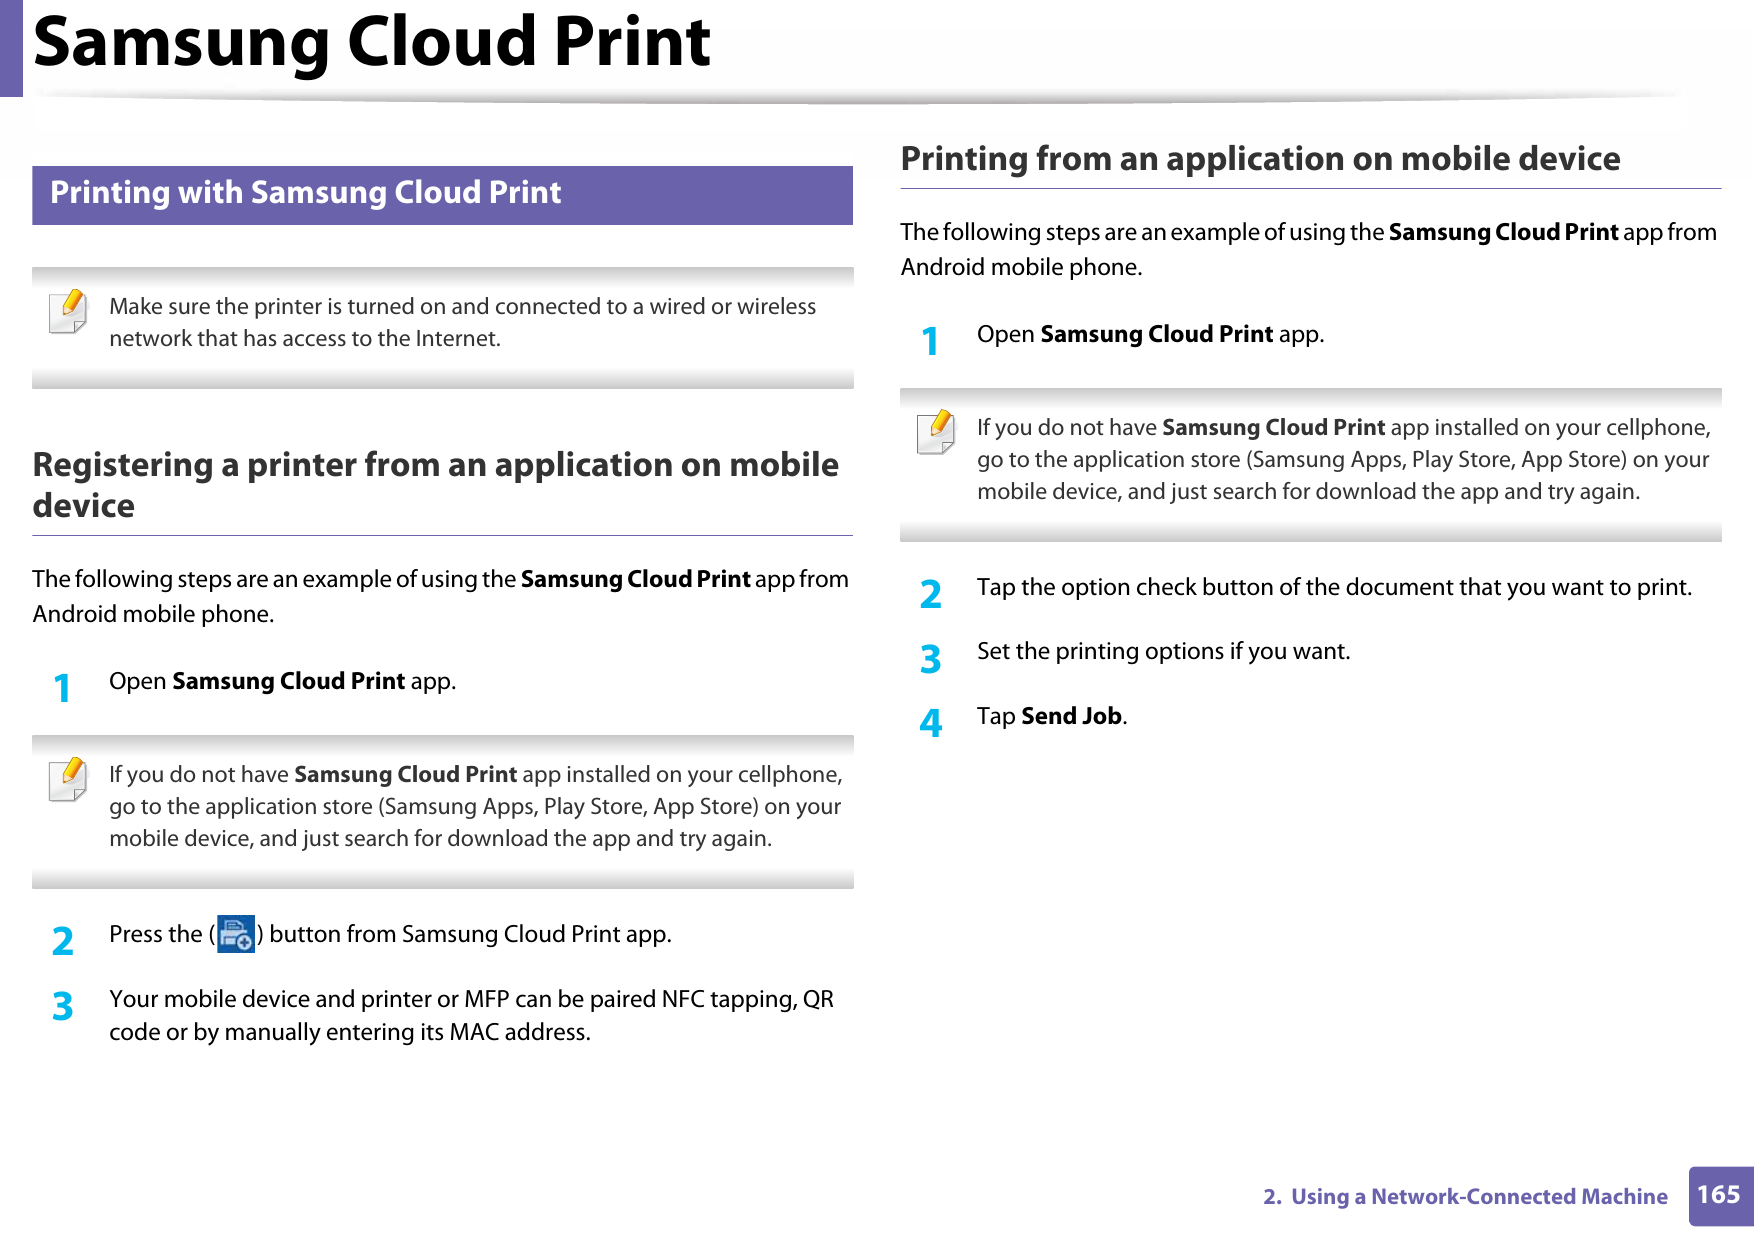 Samsung Cloud Print1652.  Using a Network-Connected Machine34 Printing with Samsung Cloud Print Make sure the printer is turned on and connected to a wired or wireless network that has access to the Internet. Registering a printer from an application on mobile deviceThe following steps are an example of using the Samsung Cloud Print app from Android mobile phone.1Open Samsung Cloud Print app. If you do not have Samsung Cloud Print app installed on your cellphone, go to the application store (Samsung Apps, Play Store, App Store) on your mobile device, and just search for download the app and try again. 2  Press the ( ) button from Samsung Cloud Print app.3  Your mobile device and printer or MFP can be paired NFC tapping, QR code or by manually entering its MAC address.Printing from an application on mobile deviceThe following steps are an example of using the Samsung Cloud Print app from Android mobile phone.1Open Samsung Cloud Print app. If you do not have Samsung Cloud Print app installed on your cellphone, go to the application store (Samsung Apps, Play Store, App Store) on your mobile device, and just search for download the app and try again. 2  Tap the option check button of the document that you want to print.3  Set the printing options if you want.4  Tap Send Job.